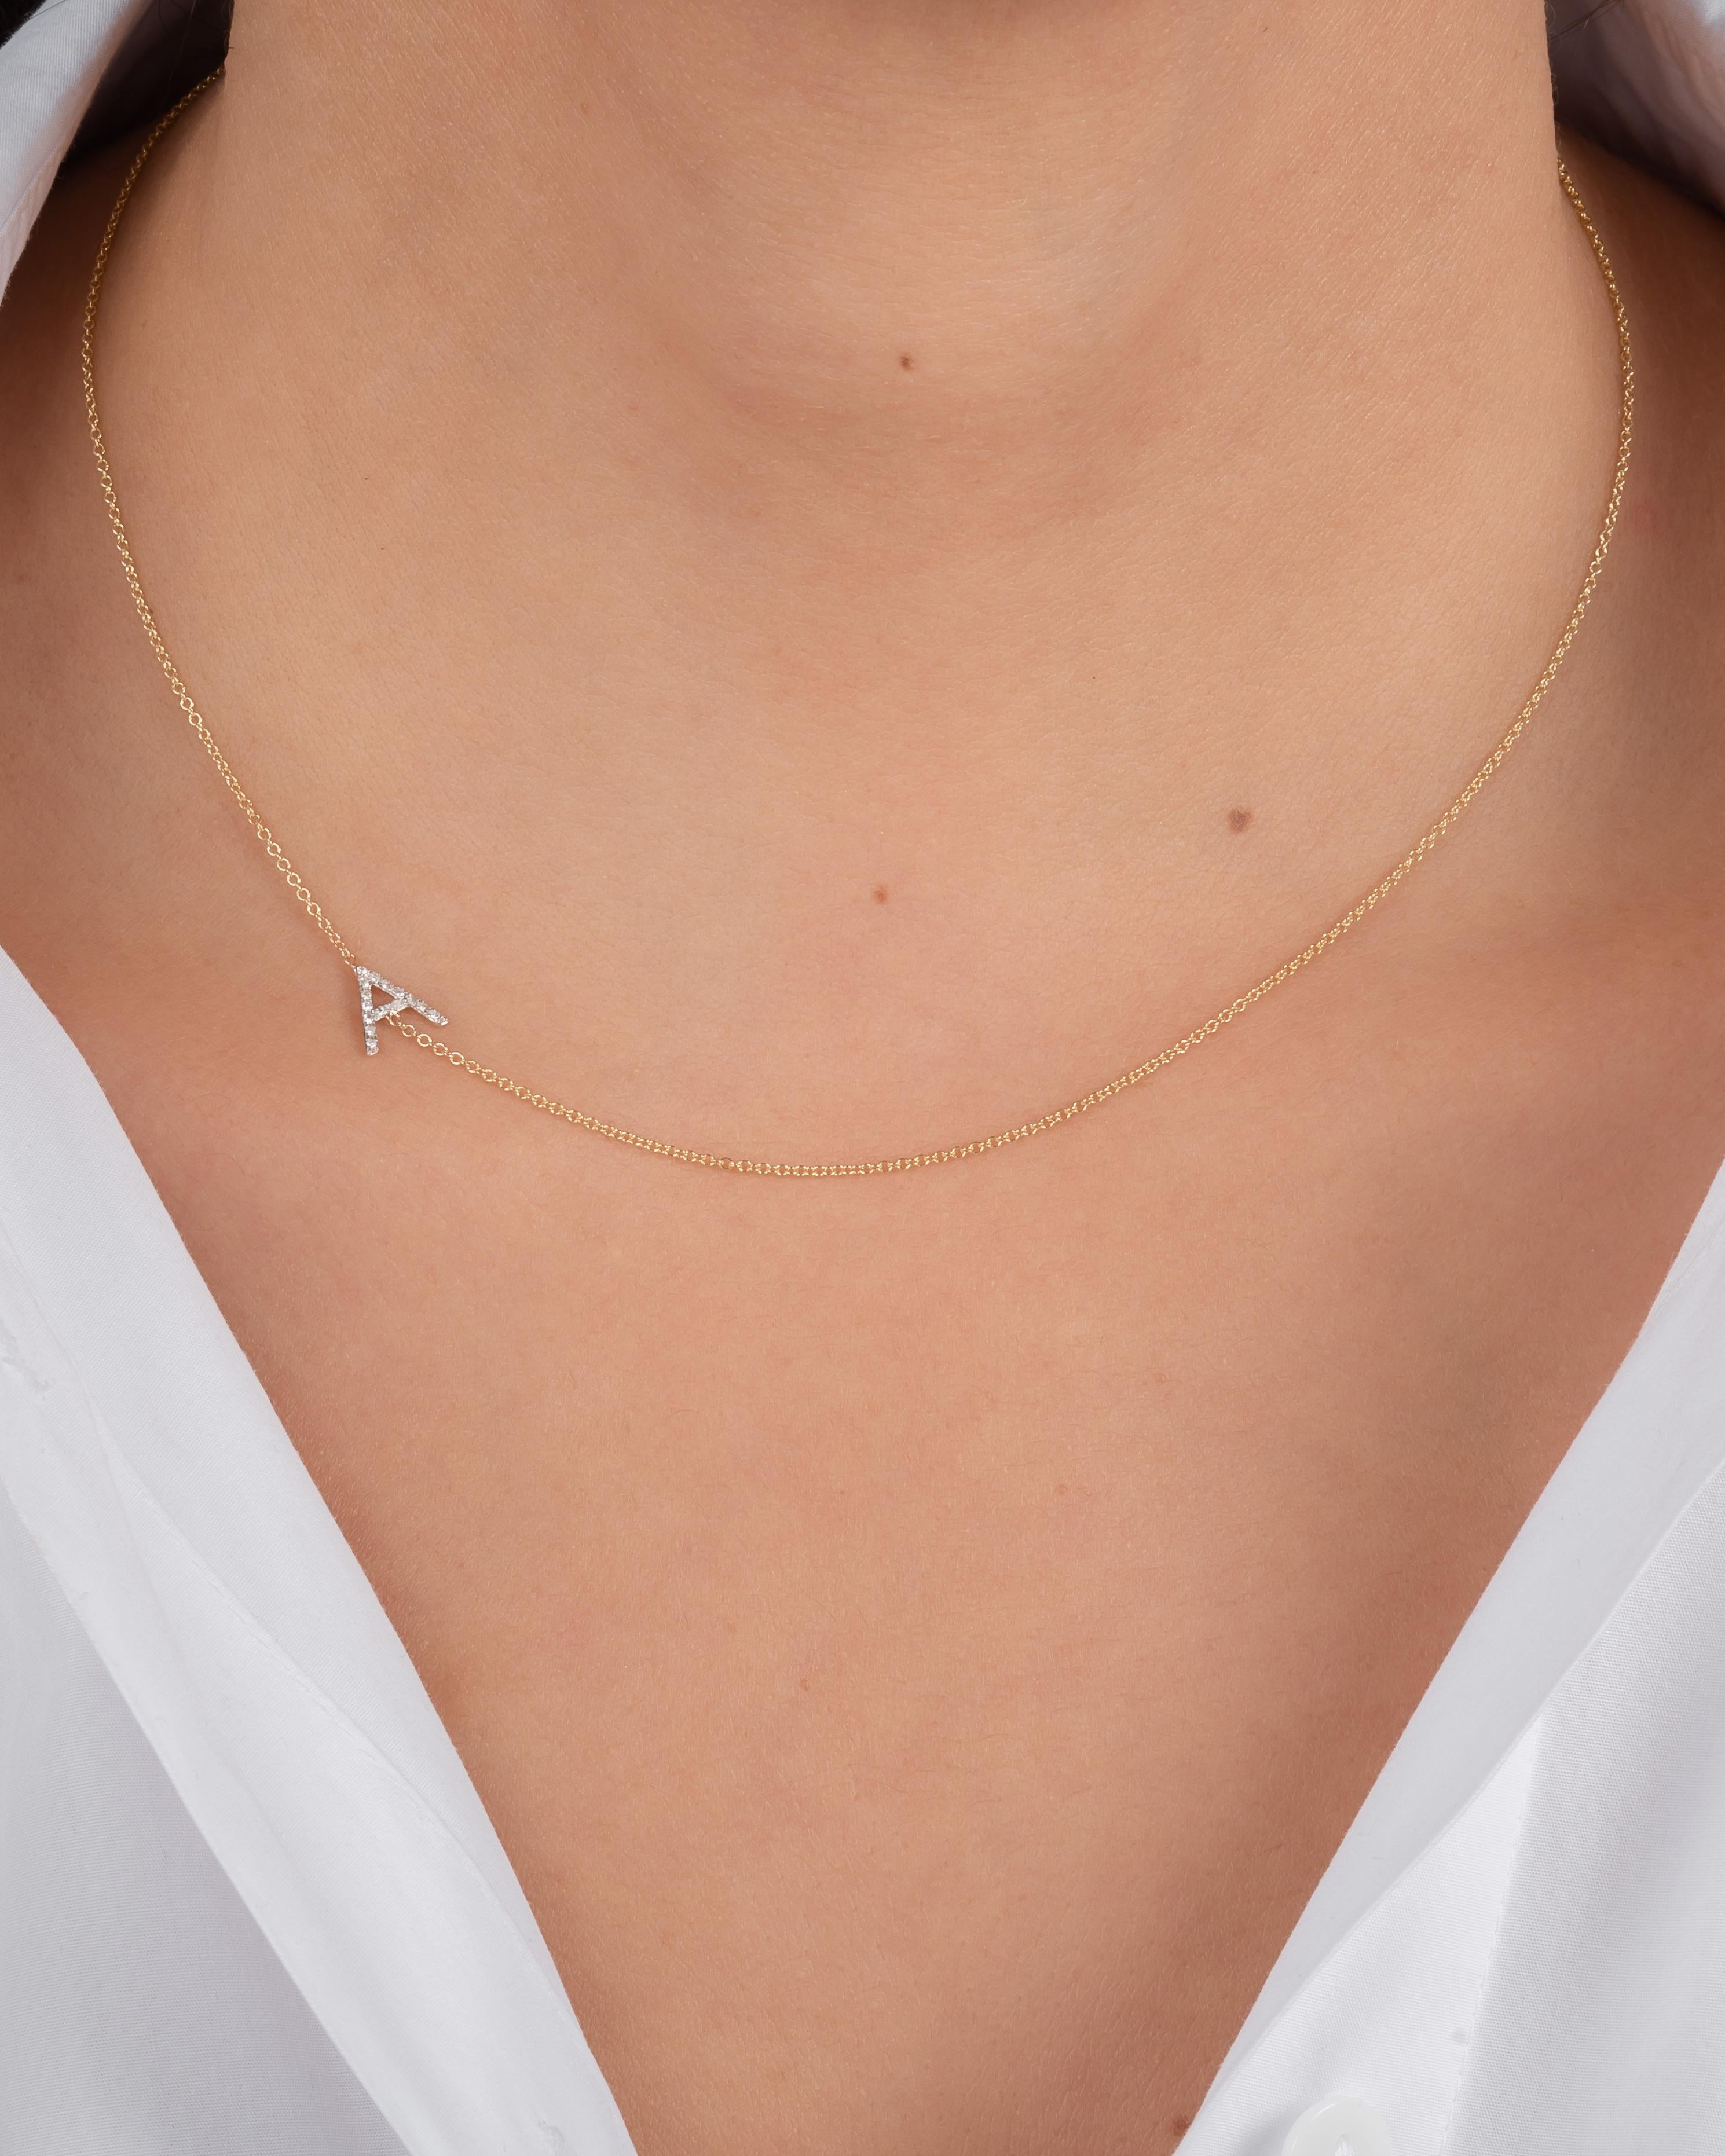 asymmetrical initial necklace with diamond